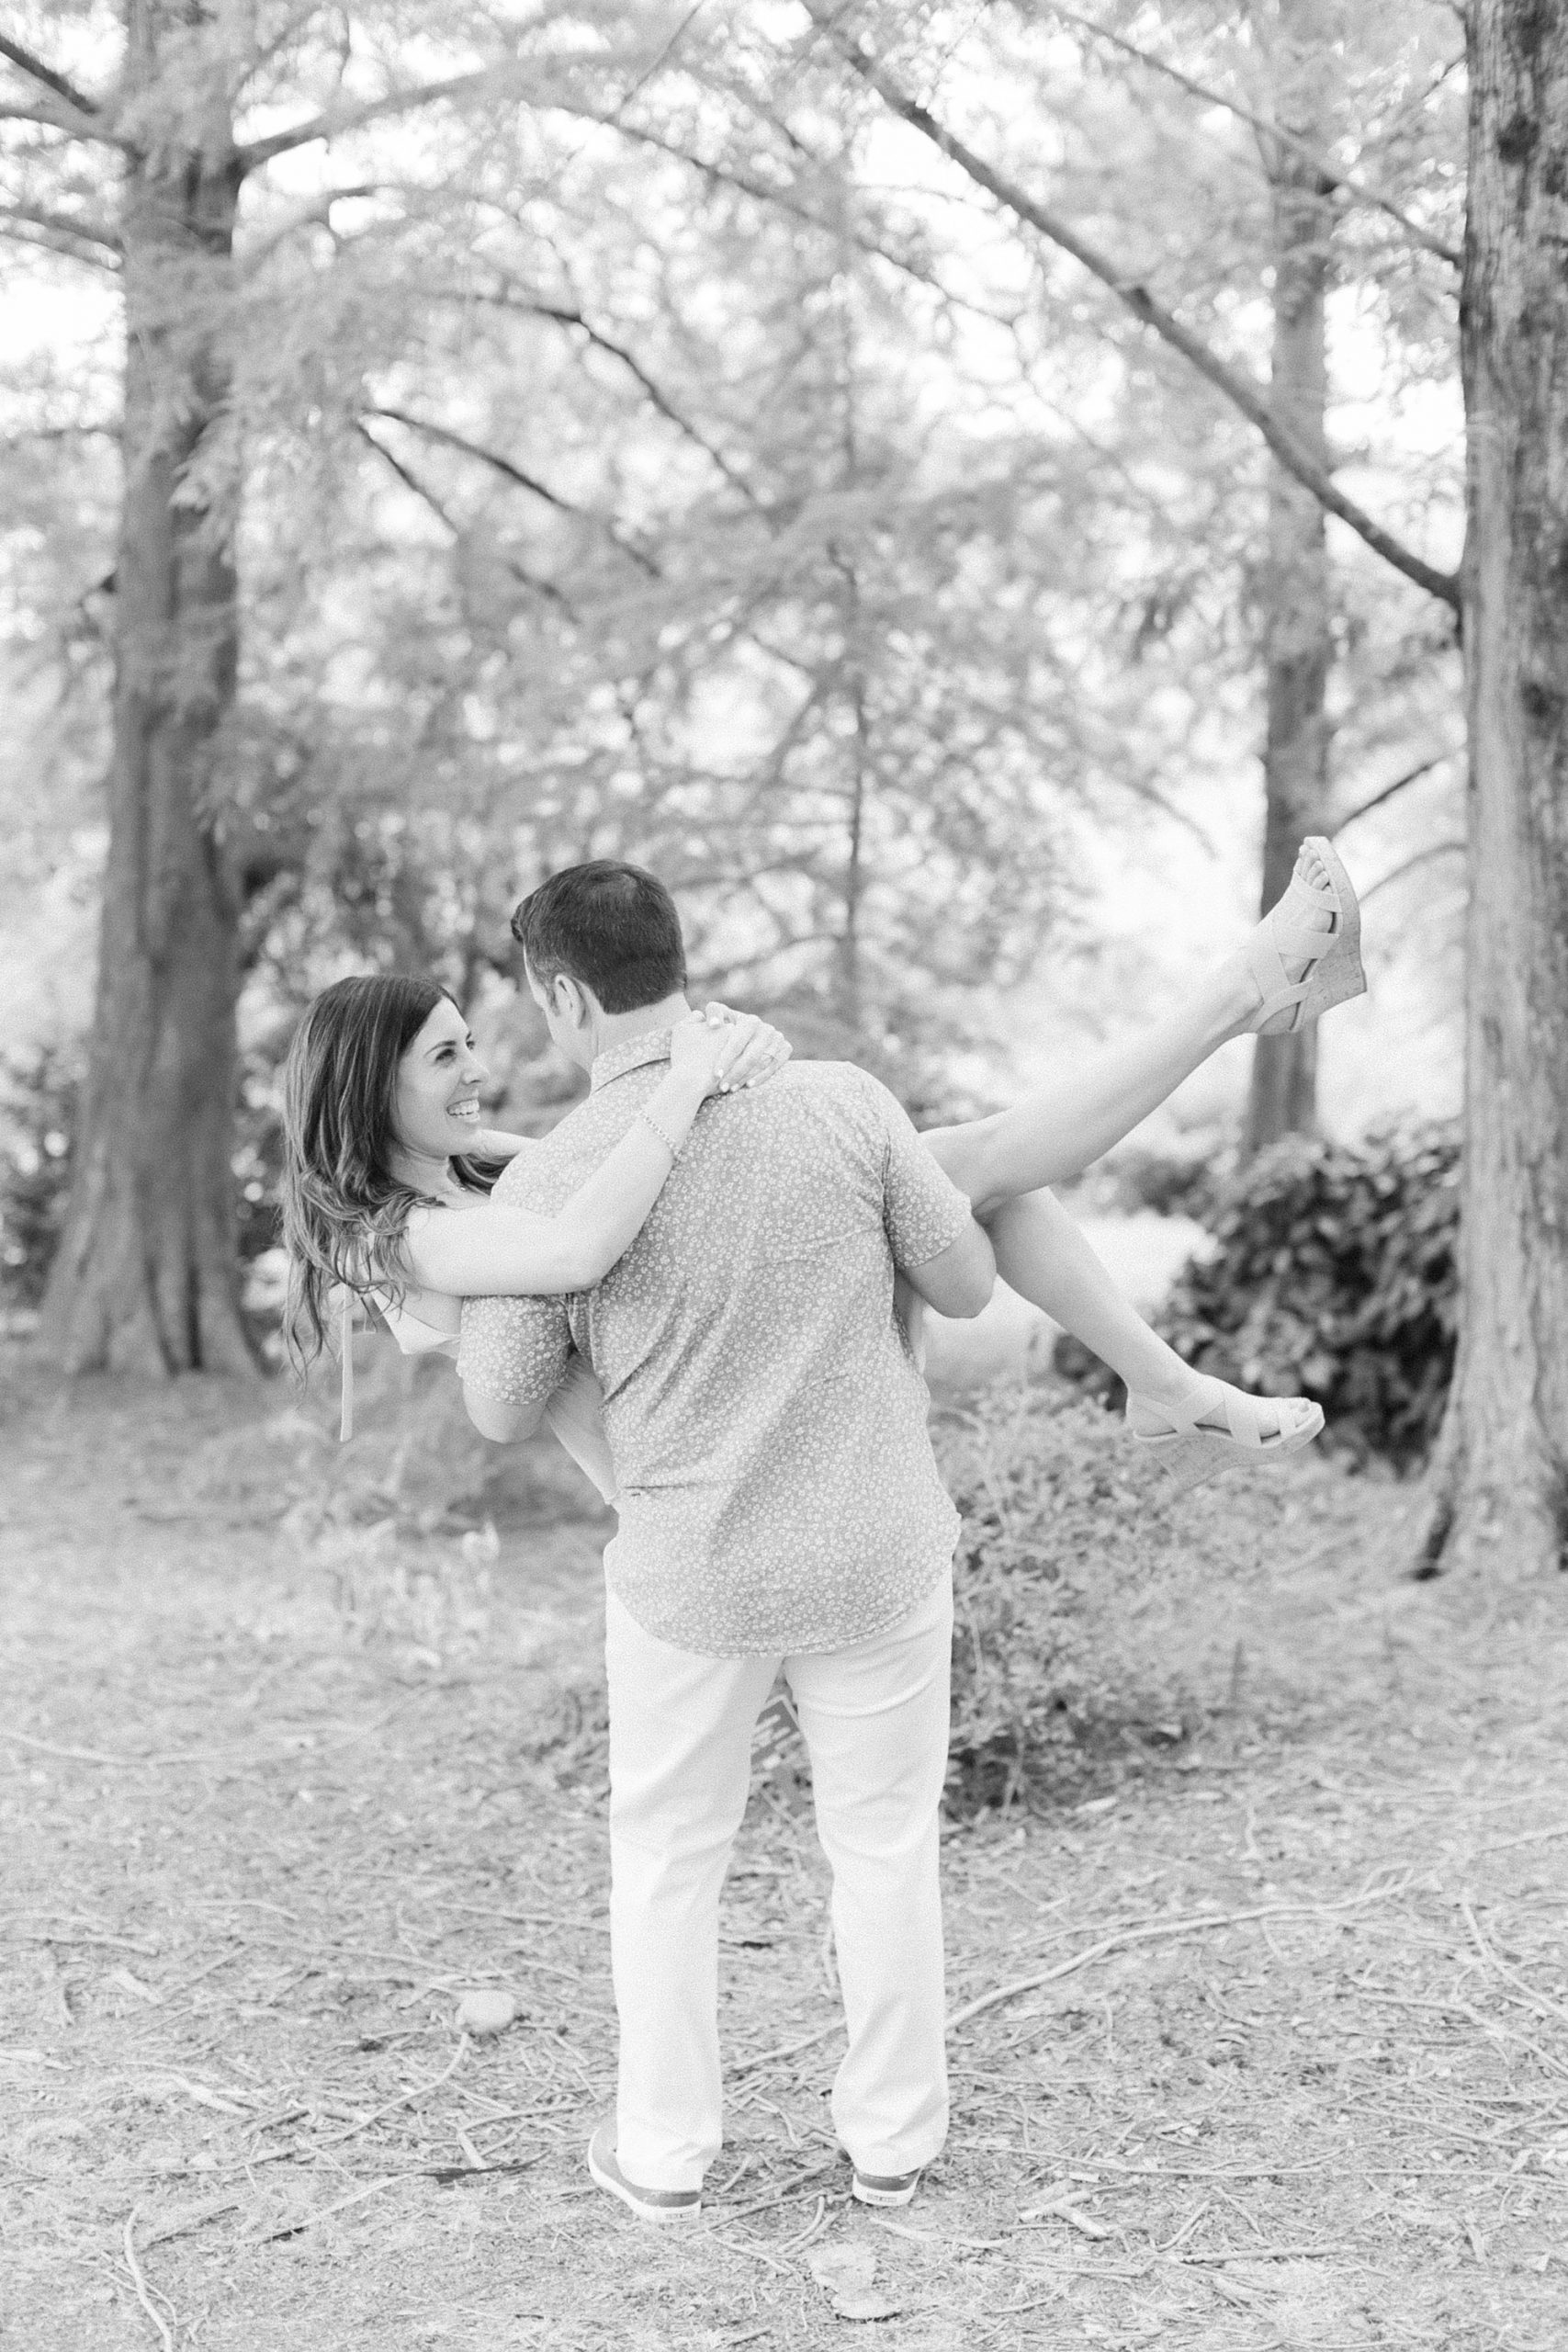 groom lifts bride up while she kicks leg out during spring engagement photos 